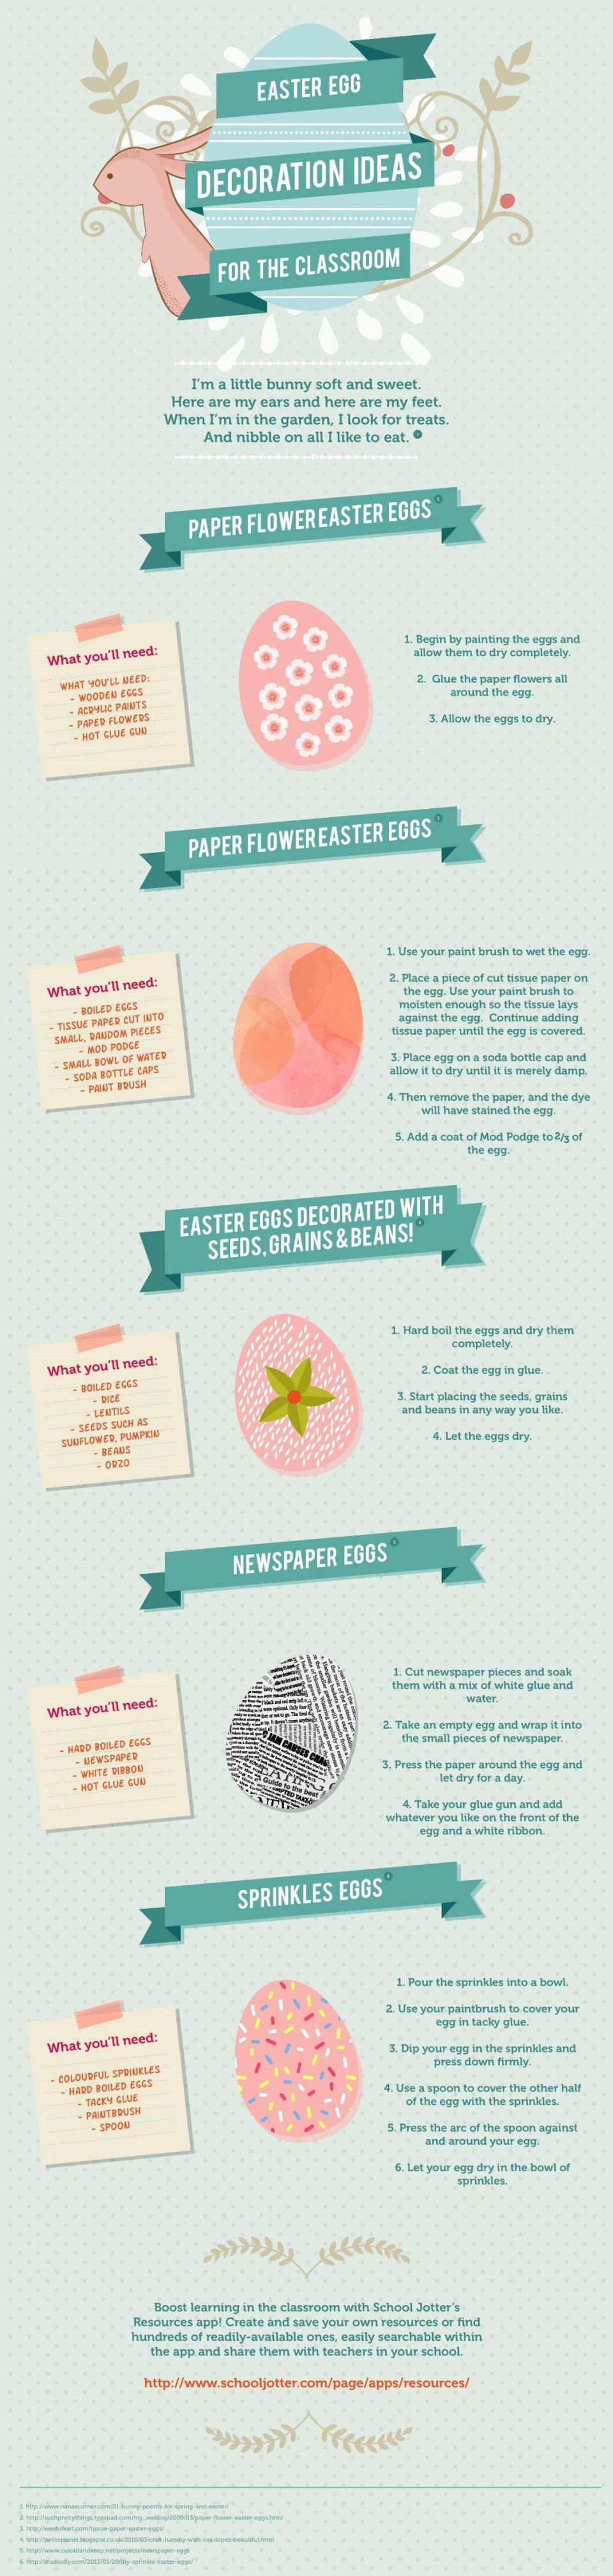 Easter Egg Decoration Ideas for the Classroom Infographic